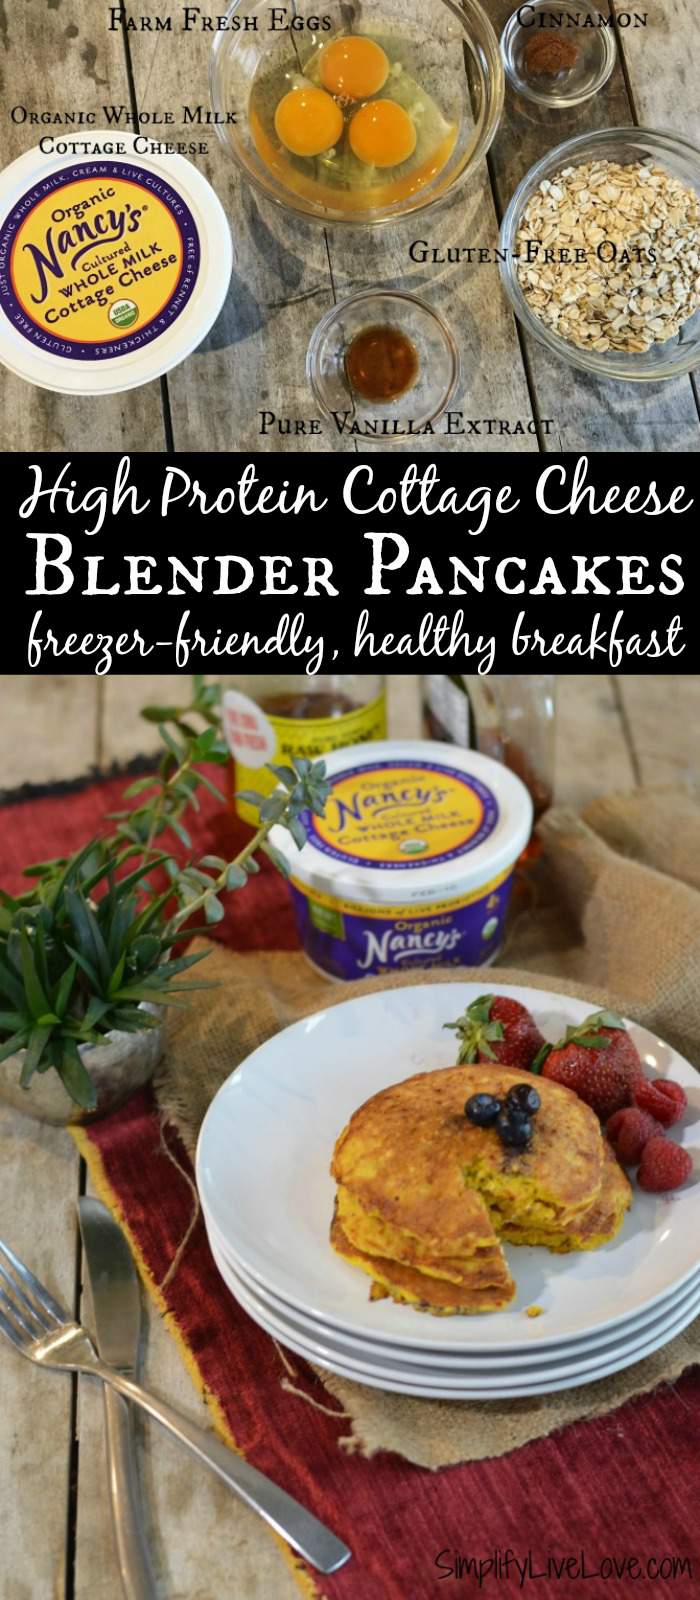 This recipe for protein rich cottage cheese blender pancakes i  freezer-friendly and kid approved breakfast recipe that your entire family will love!